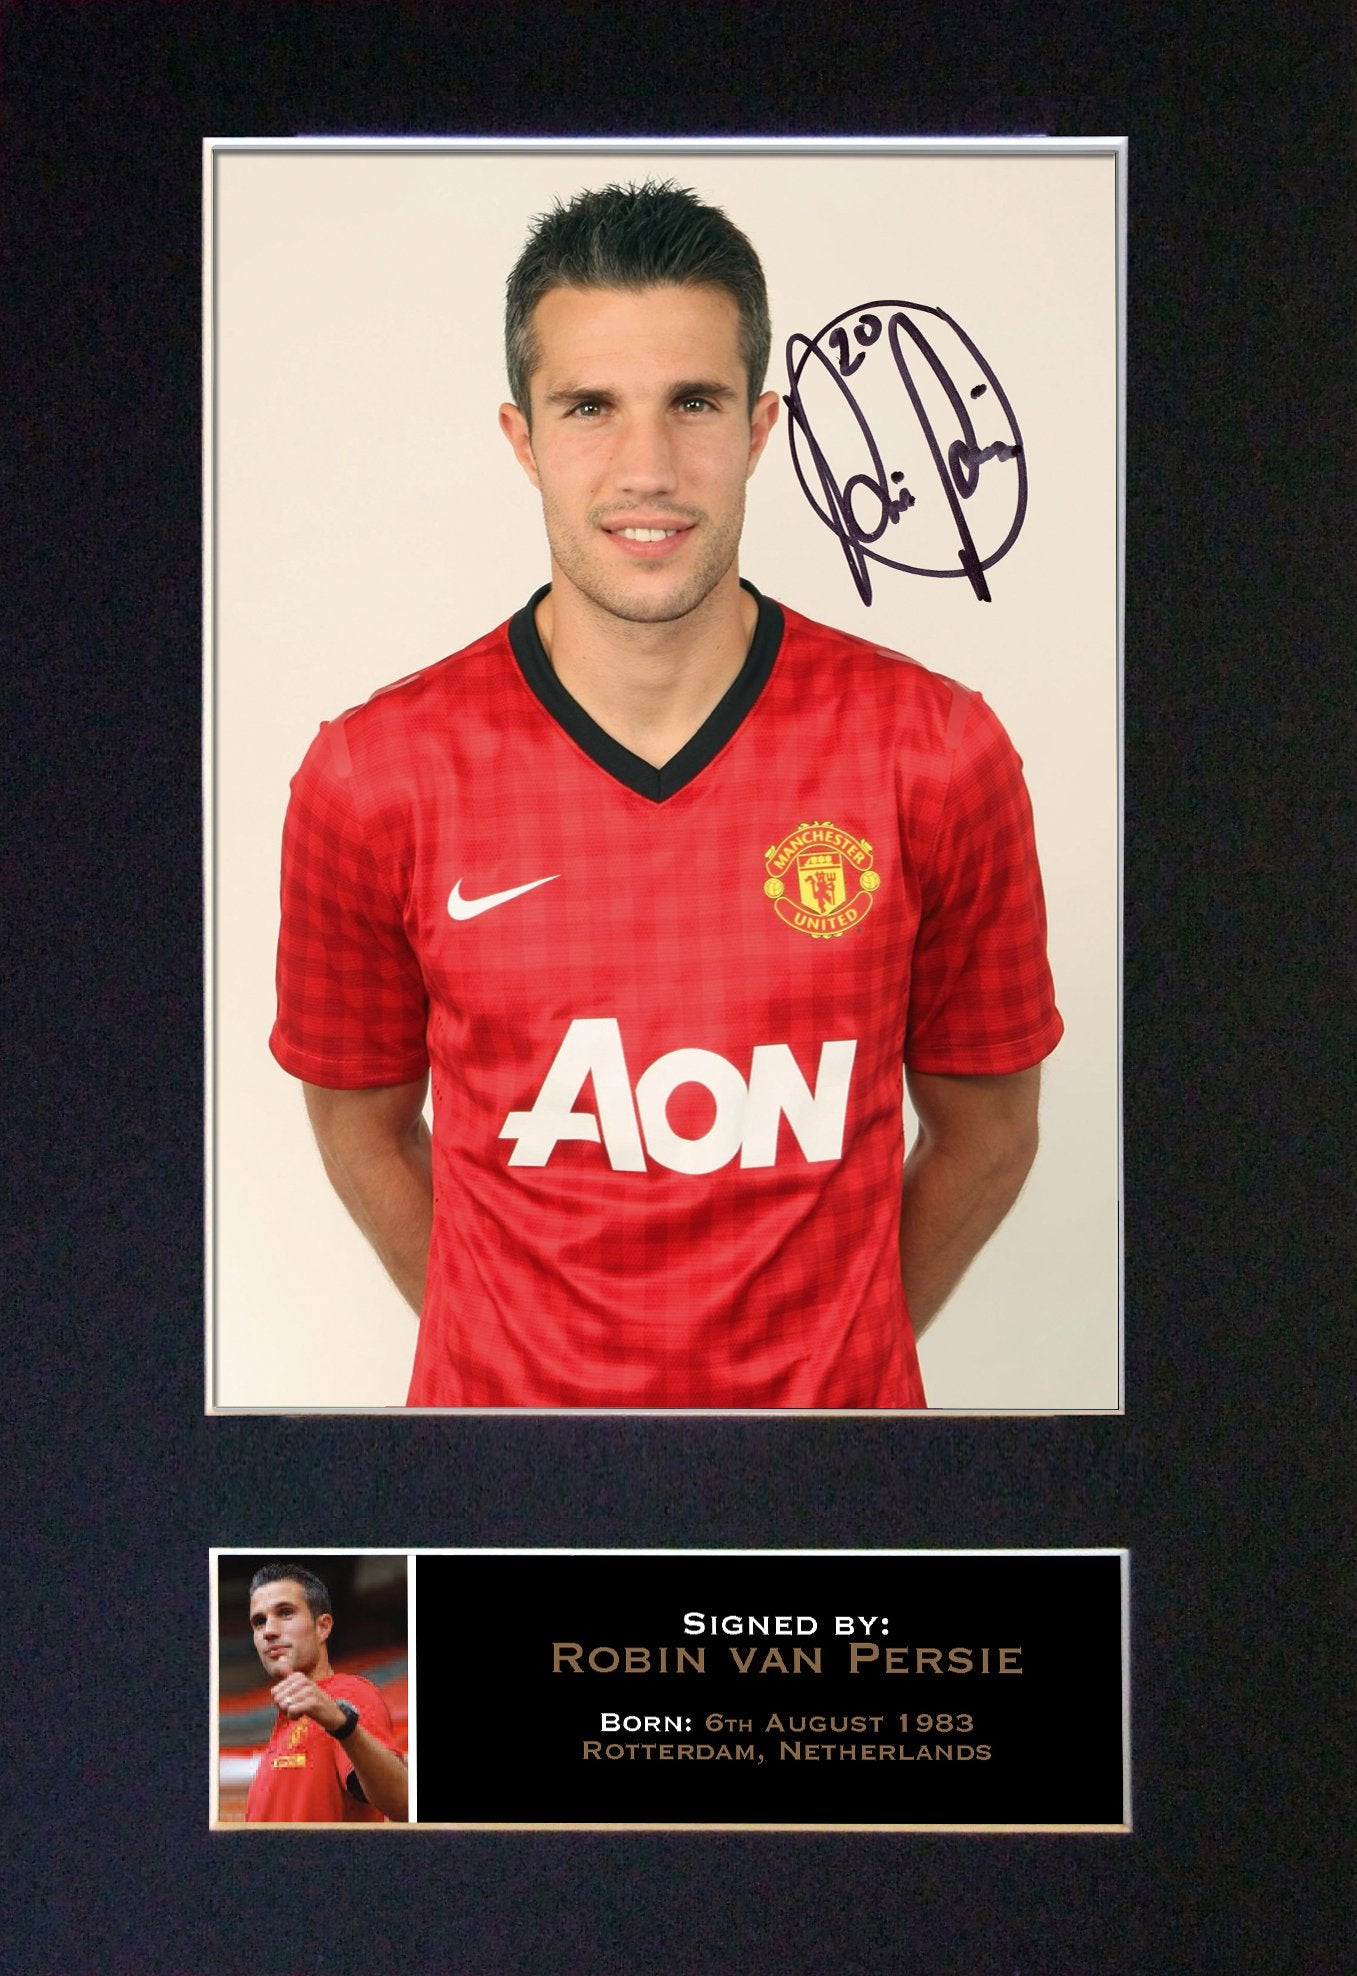 ROBIN VAN PERSIE No1 Mounted Signed Photo Reproduction Autograph Print A4 142